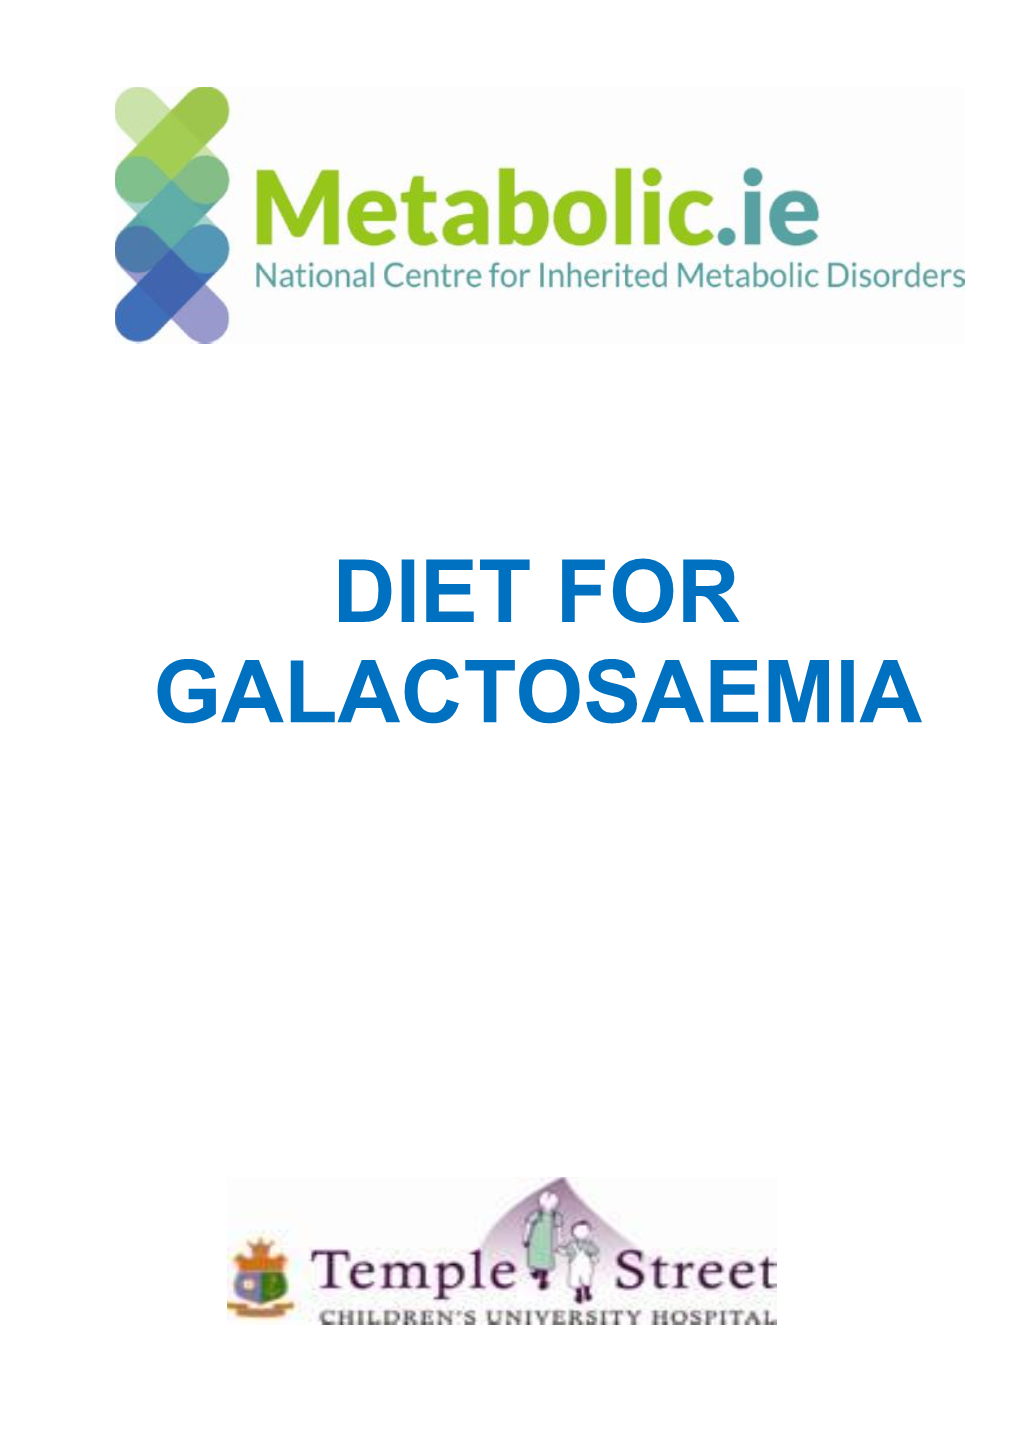 Diet for Galactosaemia Booklet